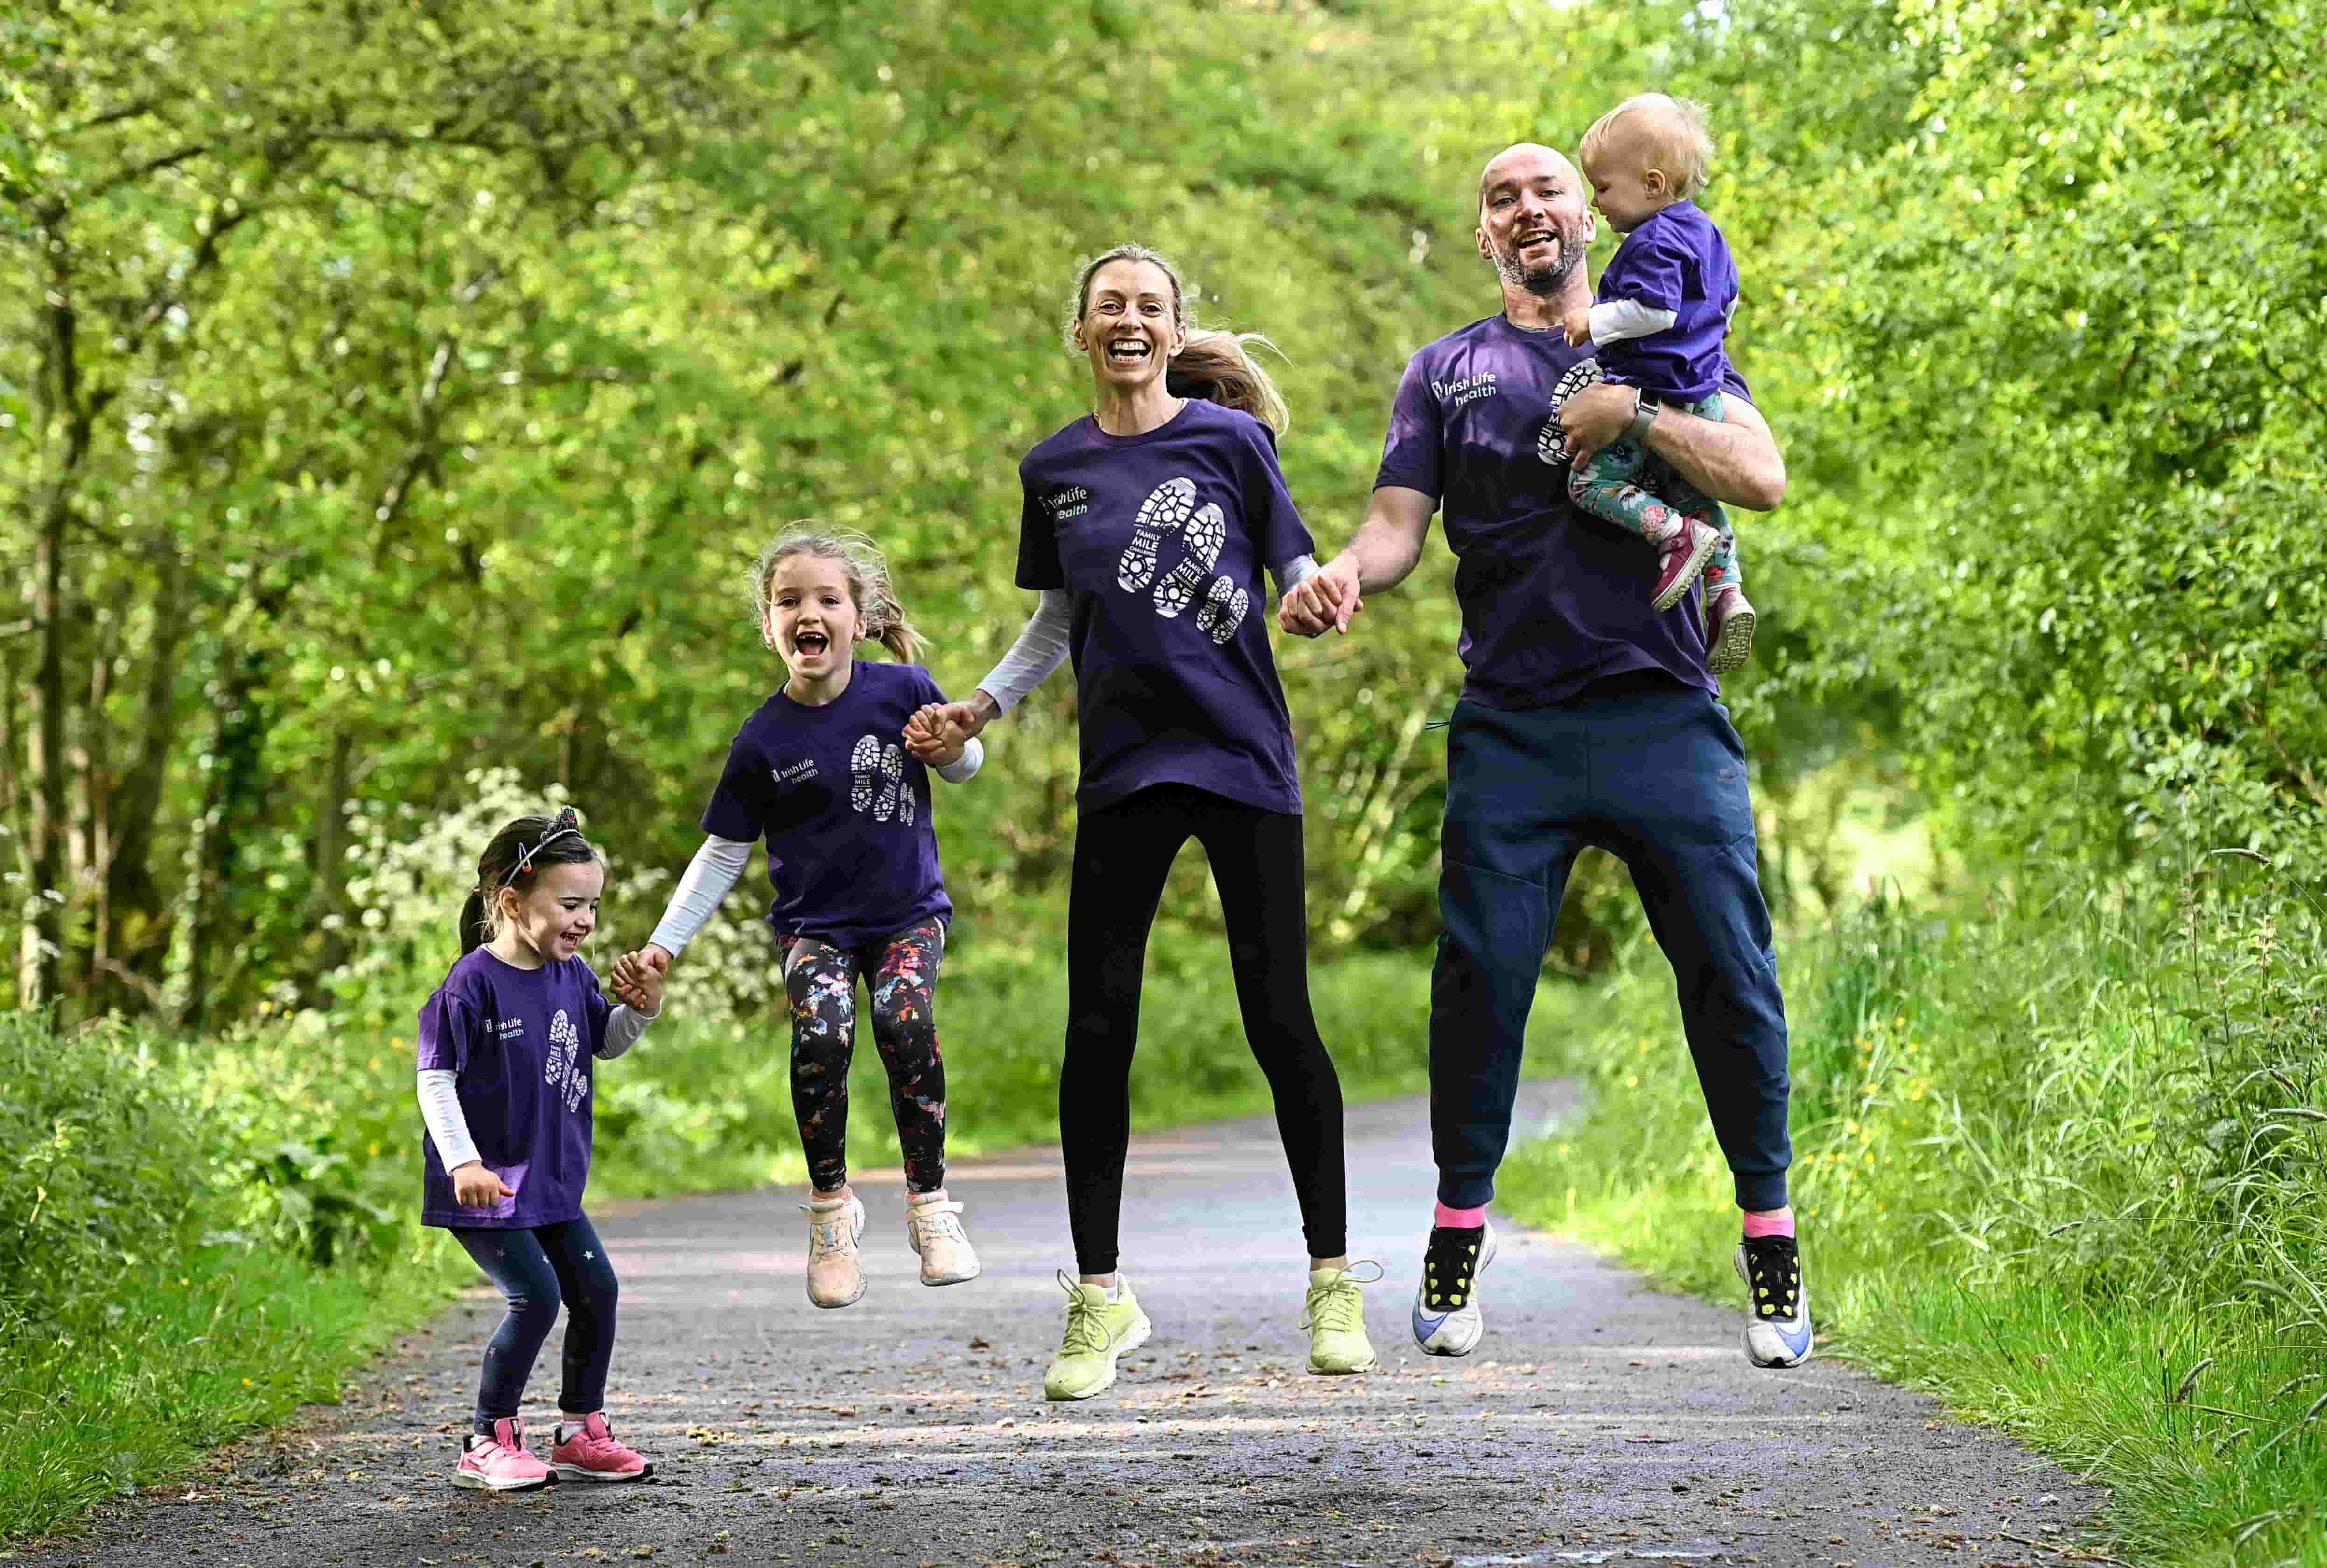 Lizzie Lee jumping for joy with her family